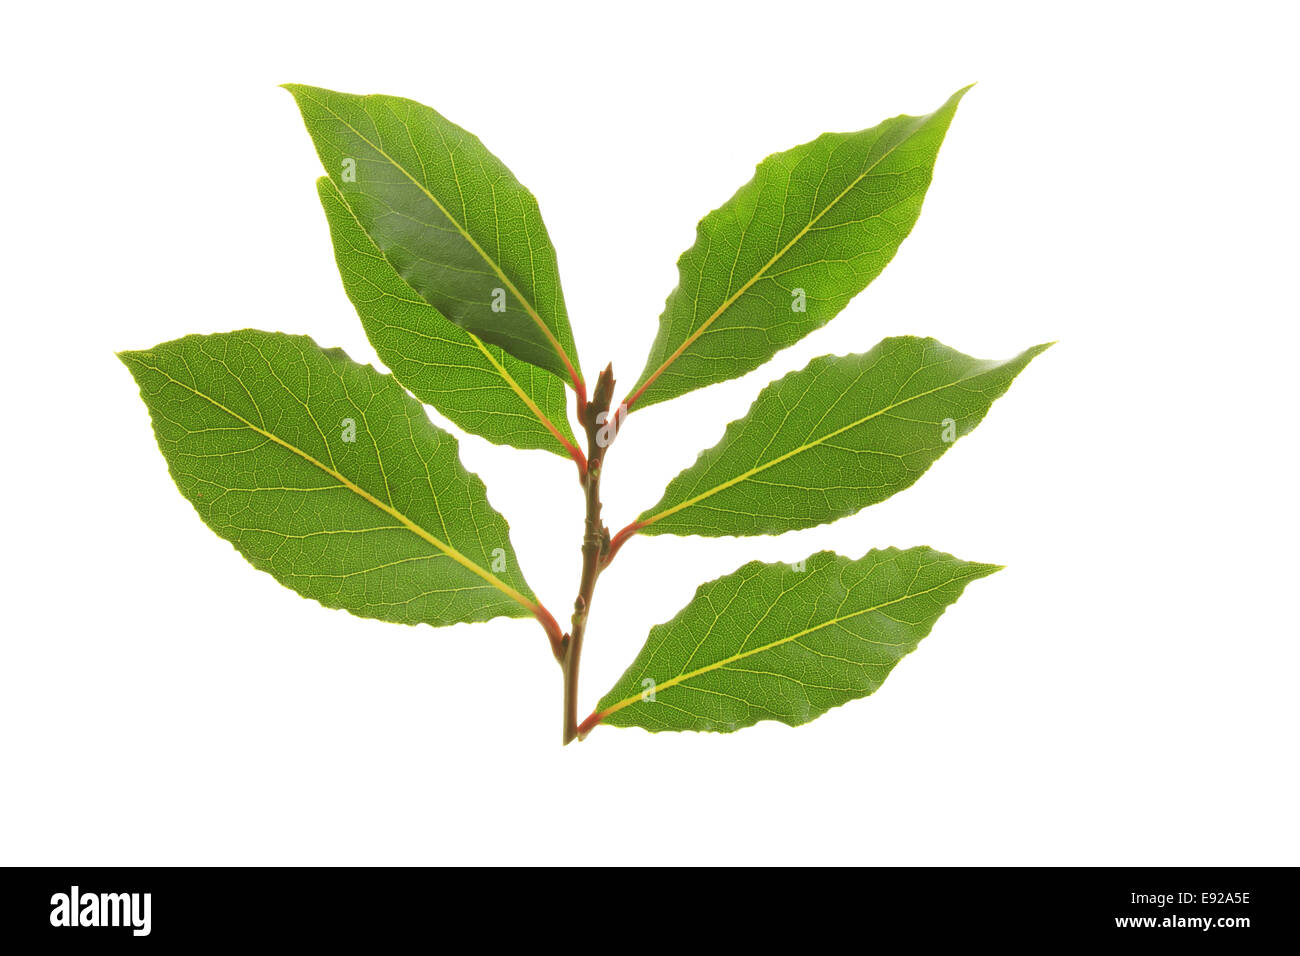 bay leaves Stock Photo